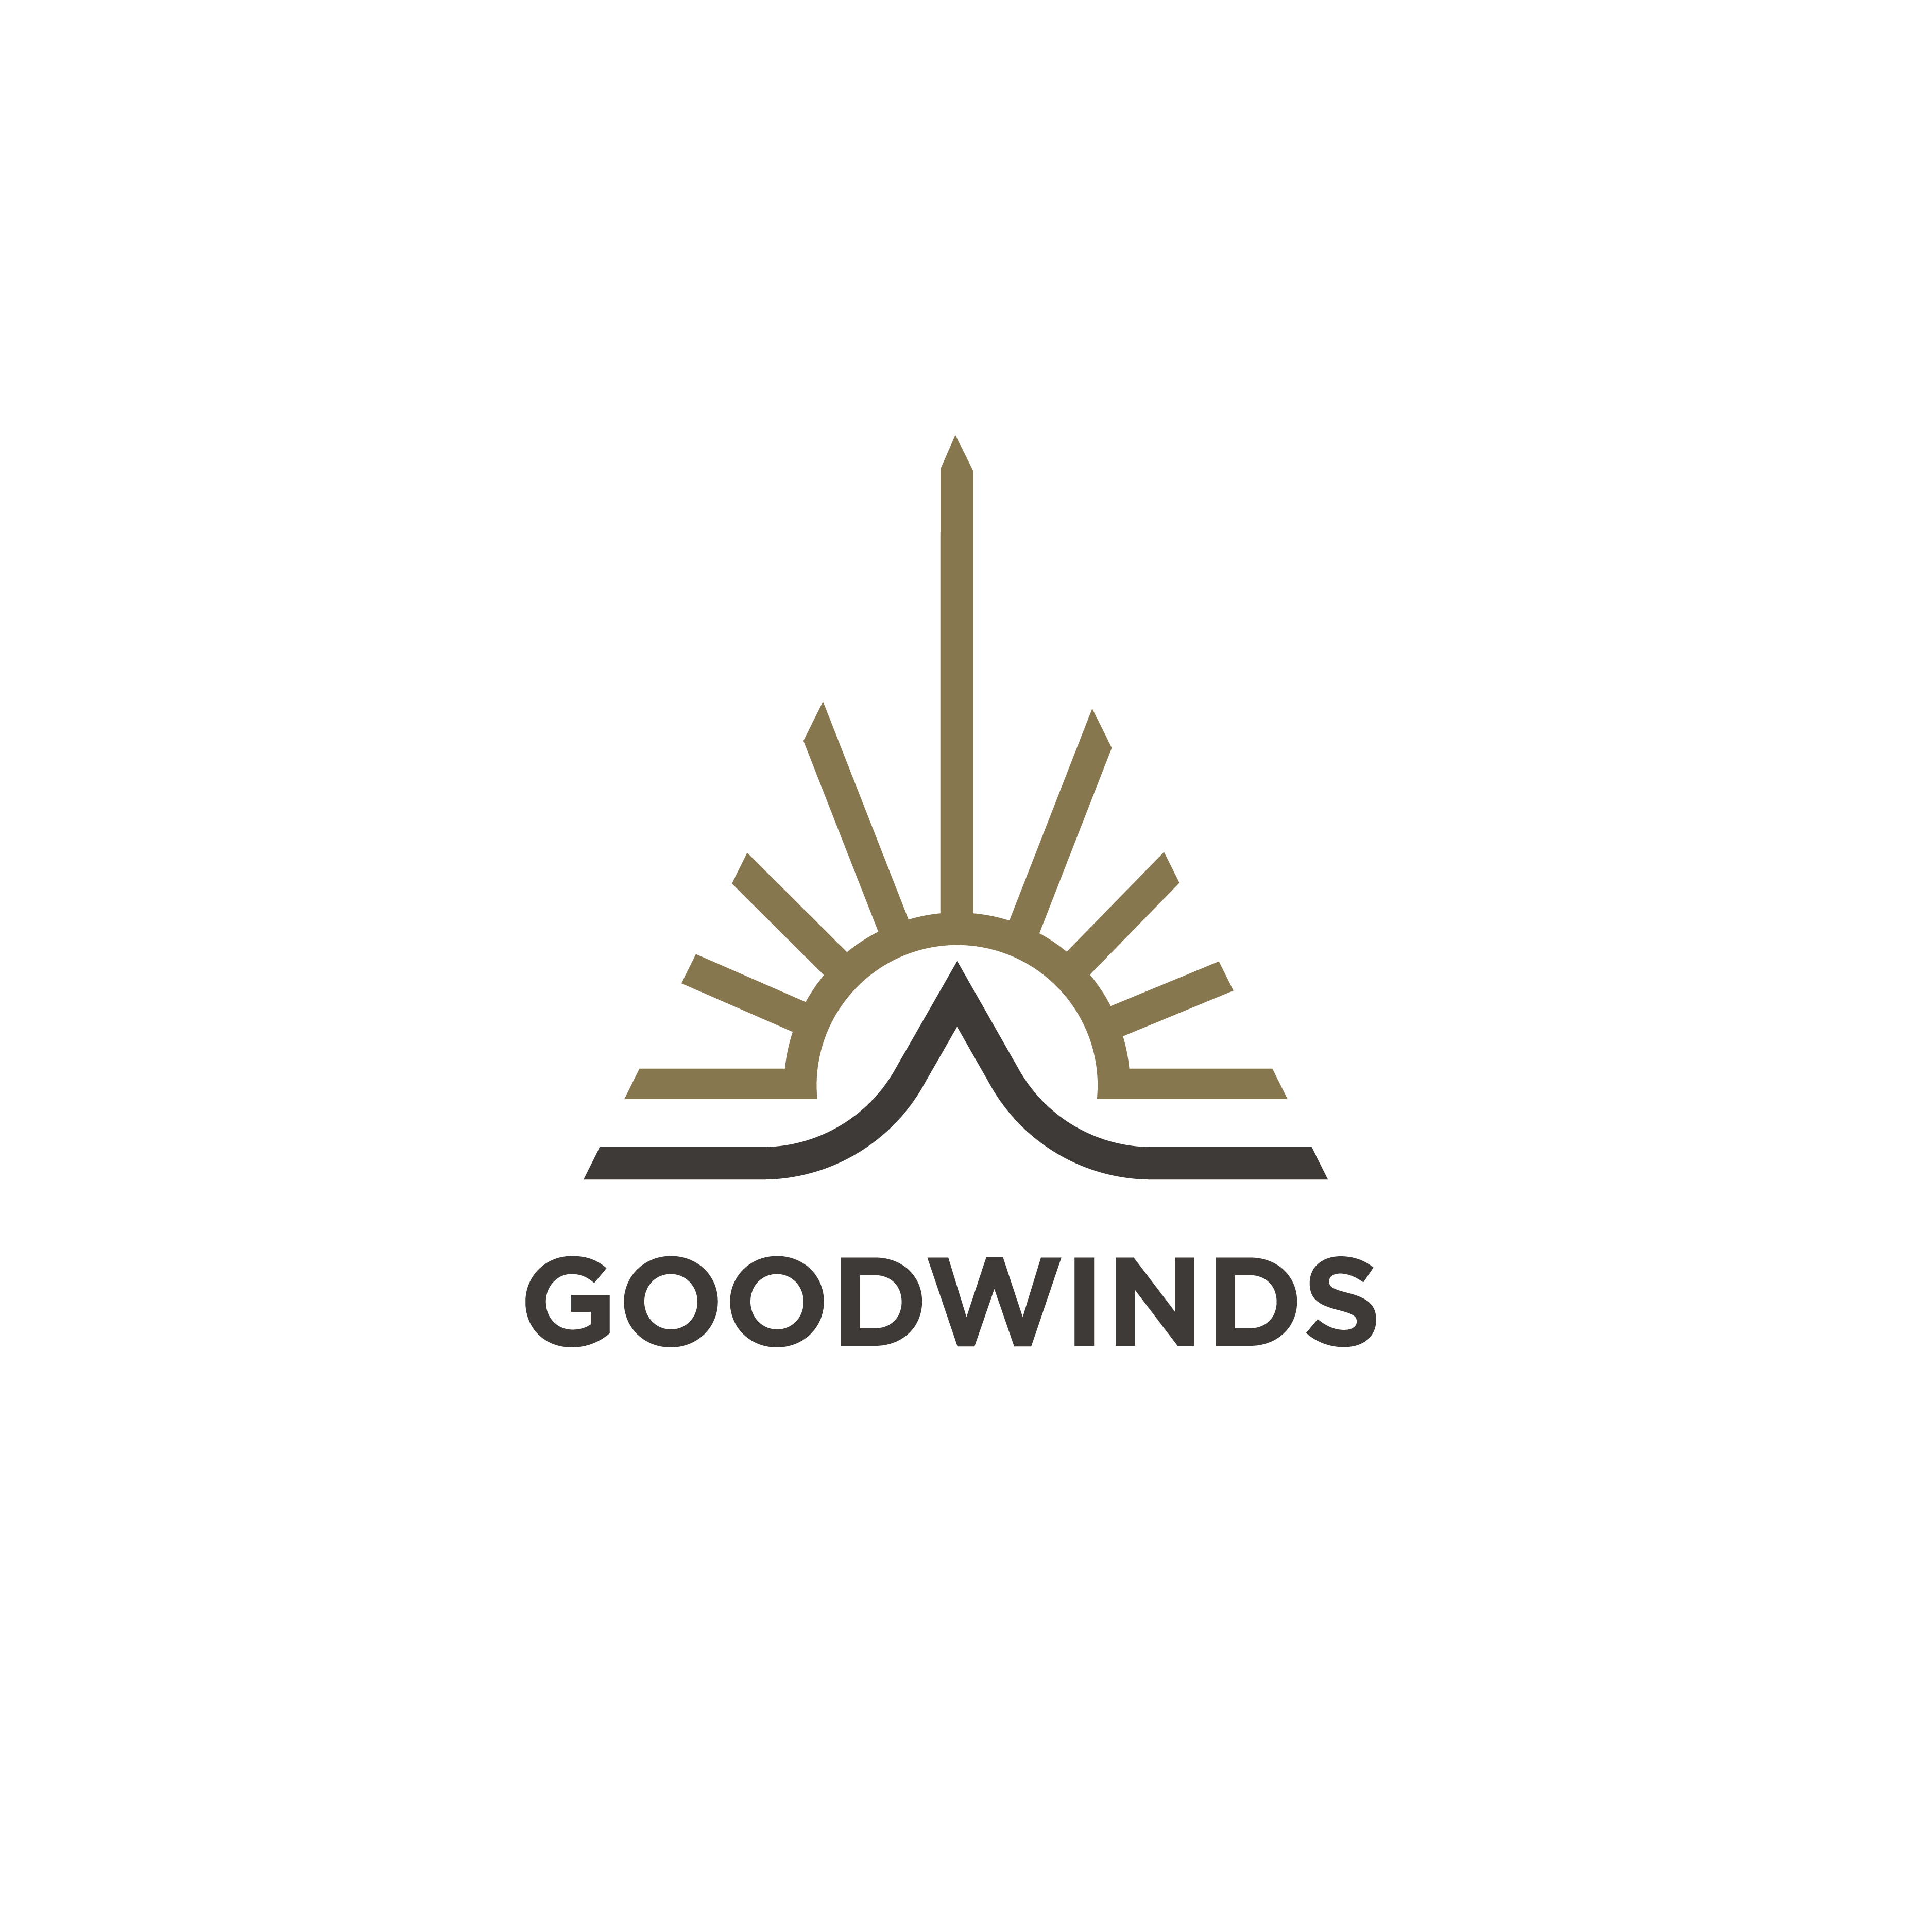 Goodwinds logo design by logo designer Steely Works for your inspiration and for the worlds largest logo competition